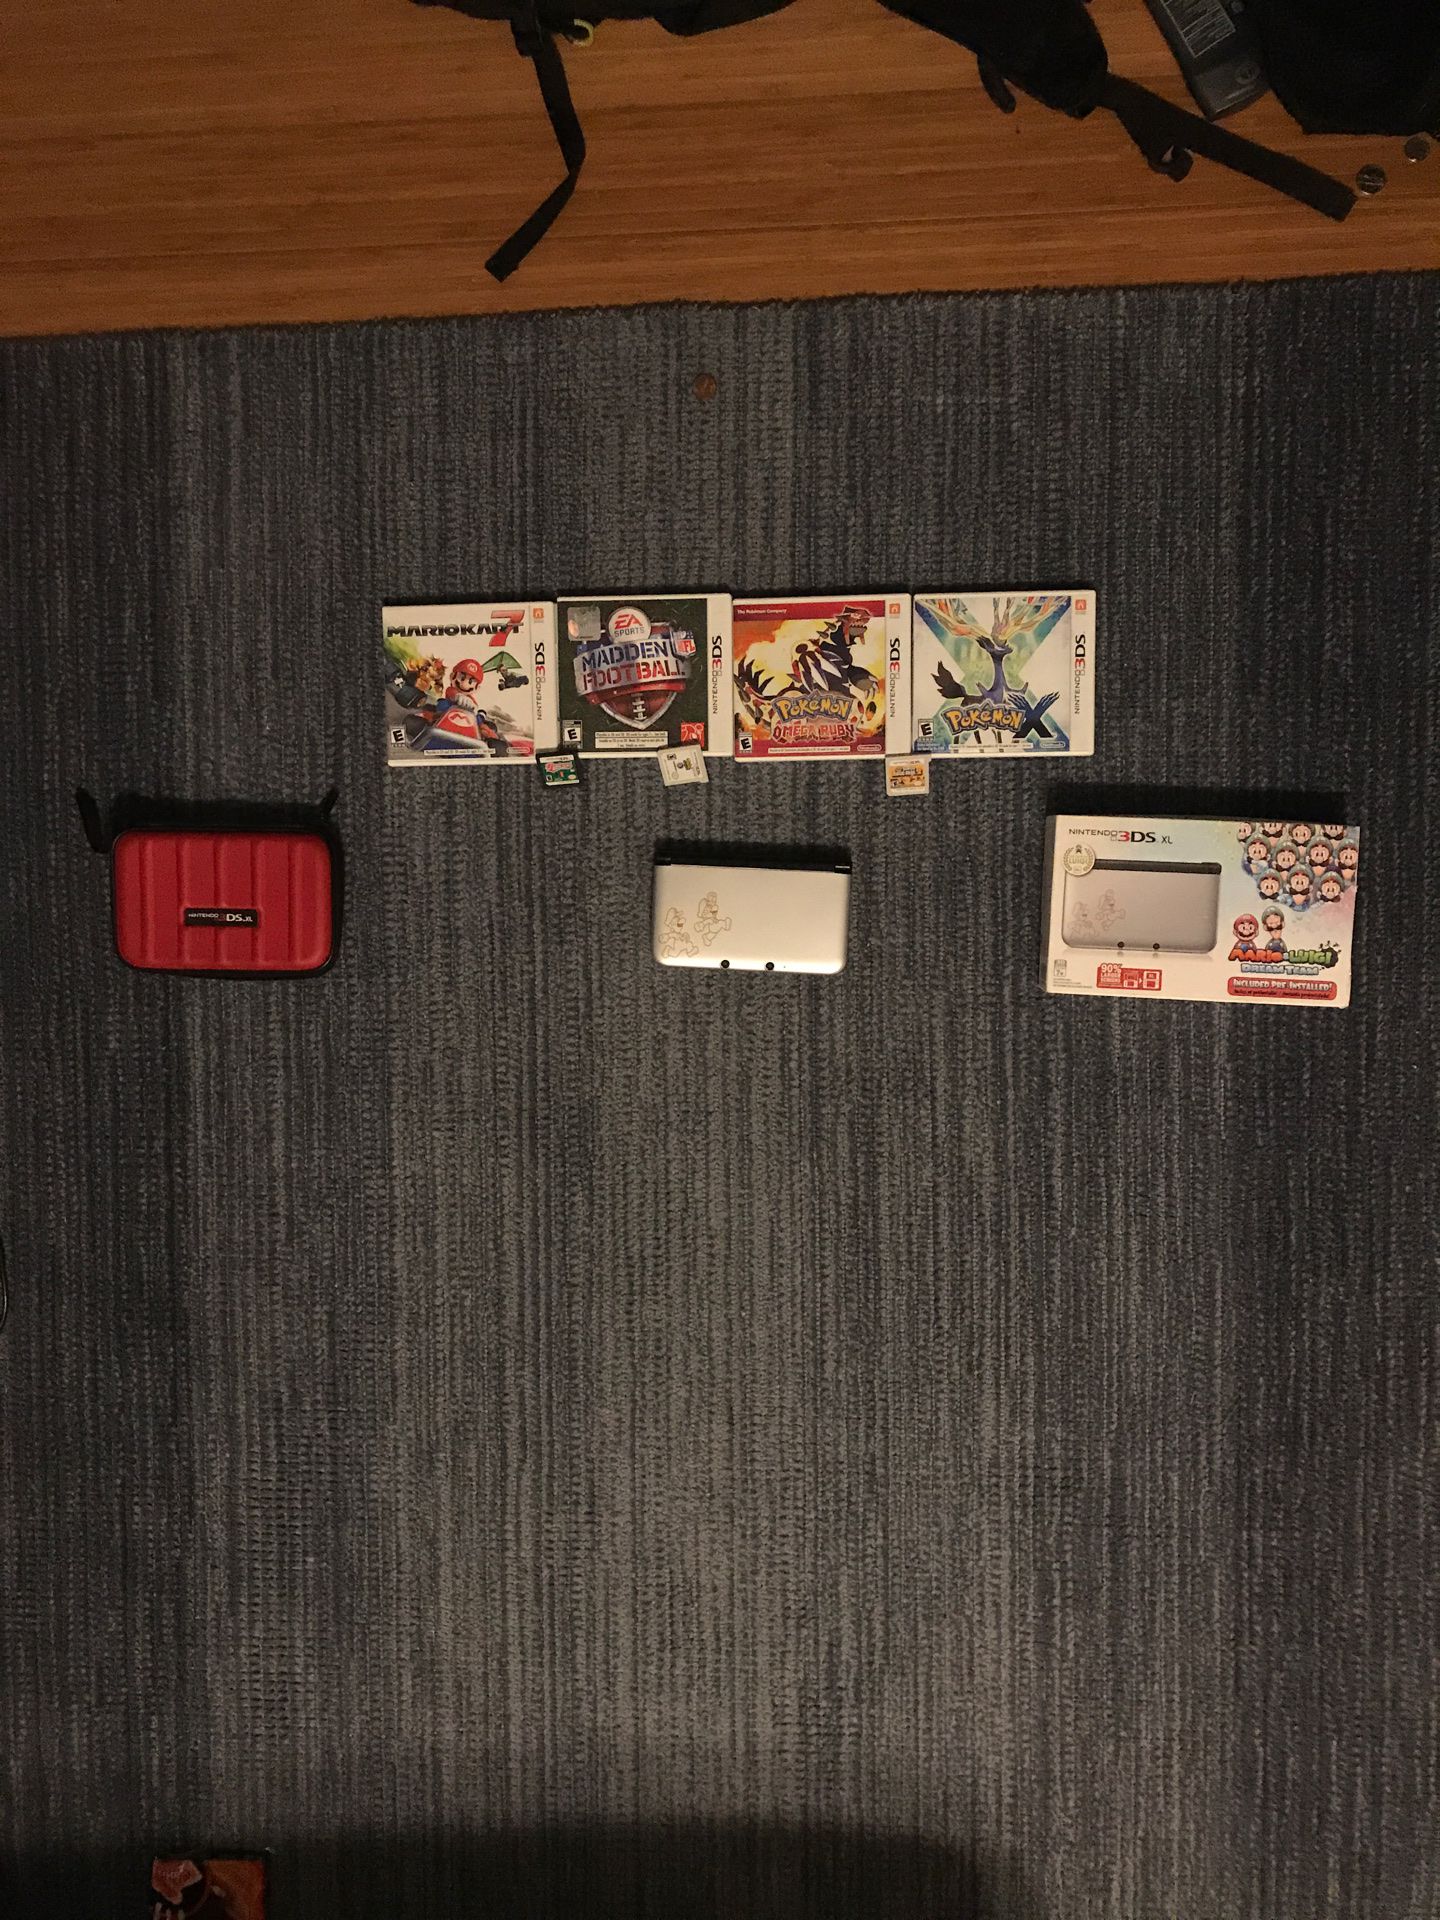 Nitendo 3DS XL and Games